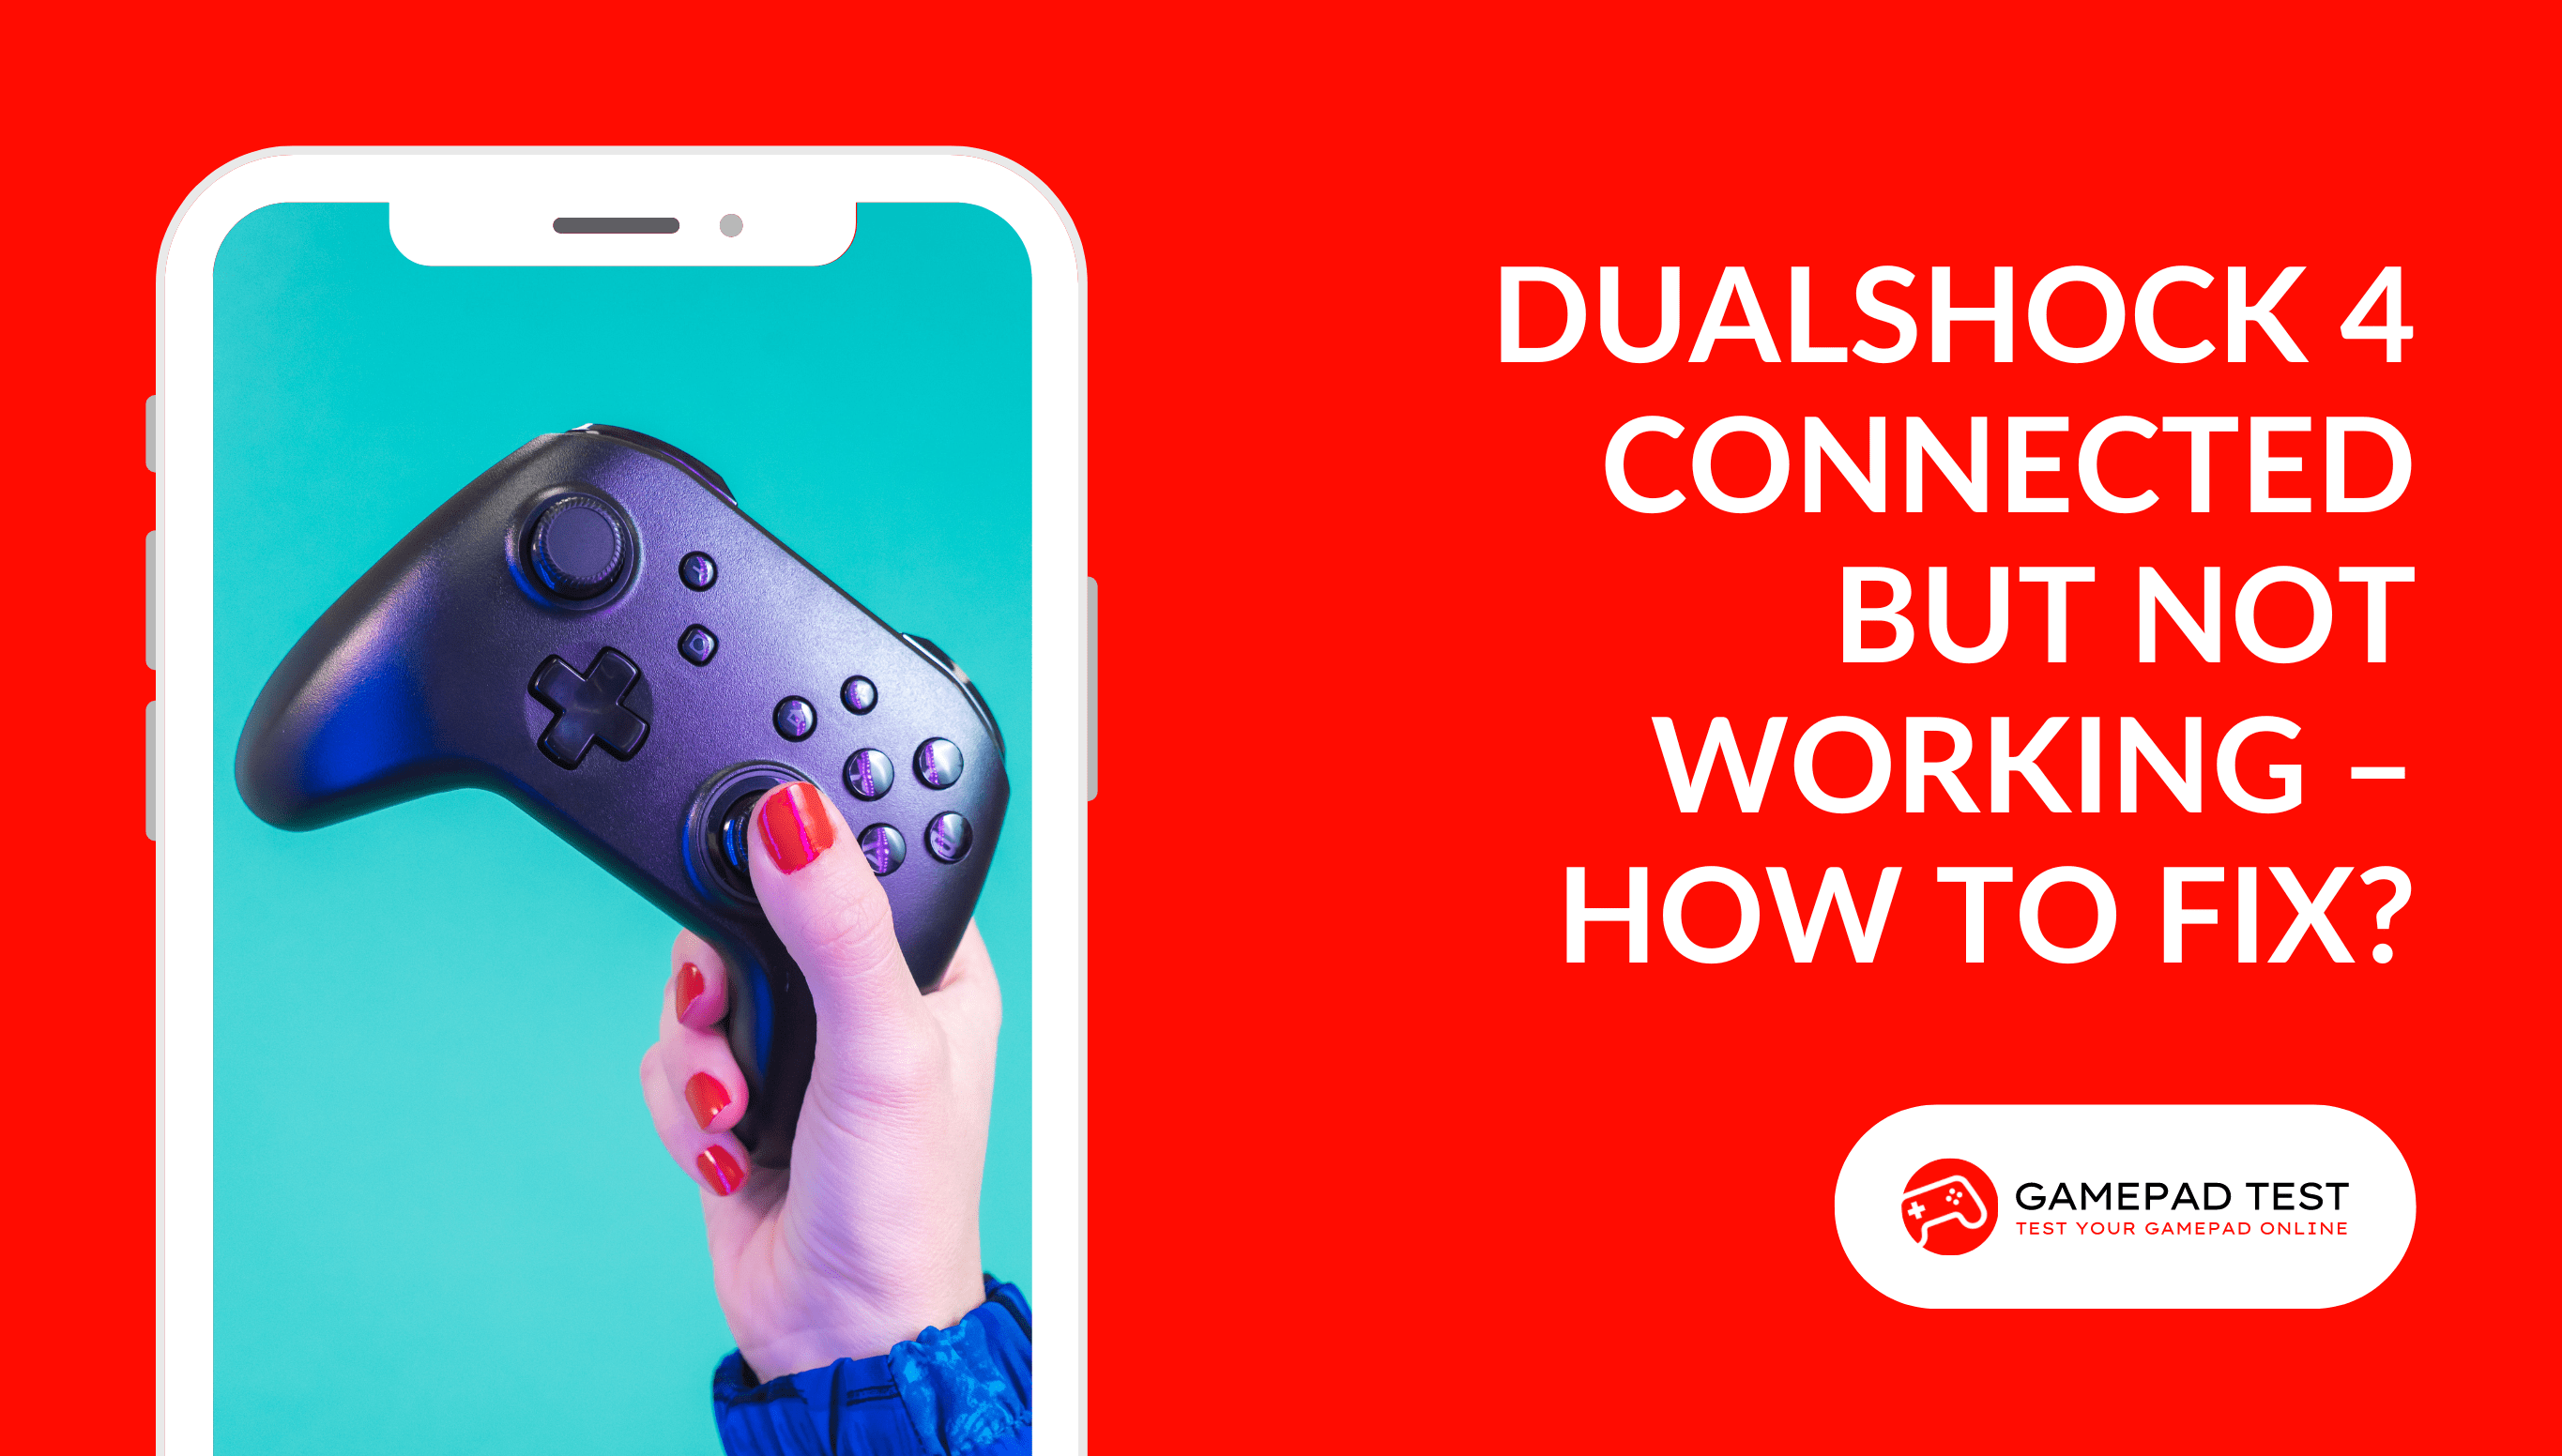 DualShock 4 Is Connected but Not Working – How to Fix - Blog Featured Image - gamepadtest.com